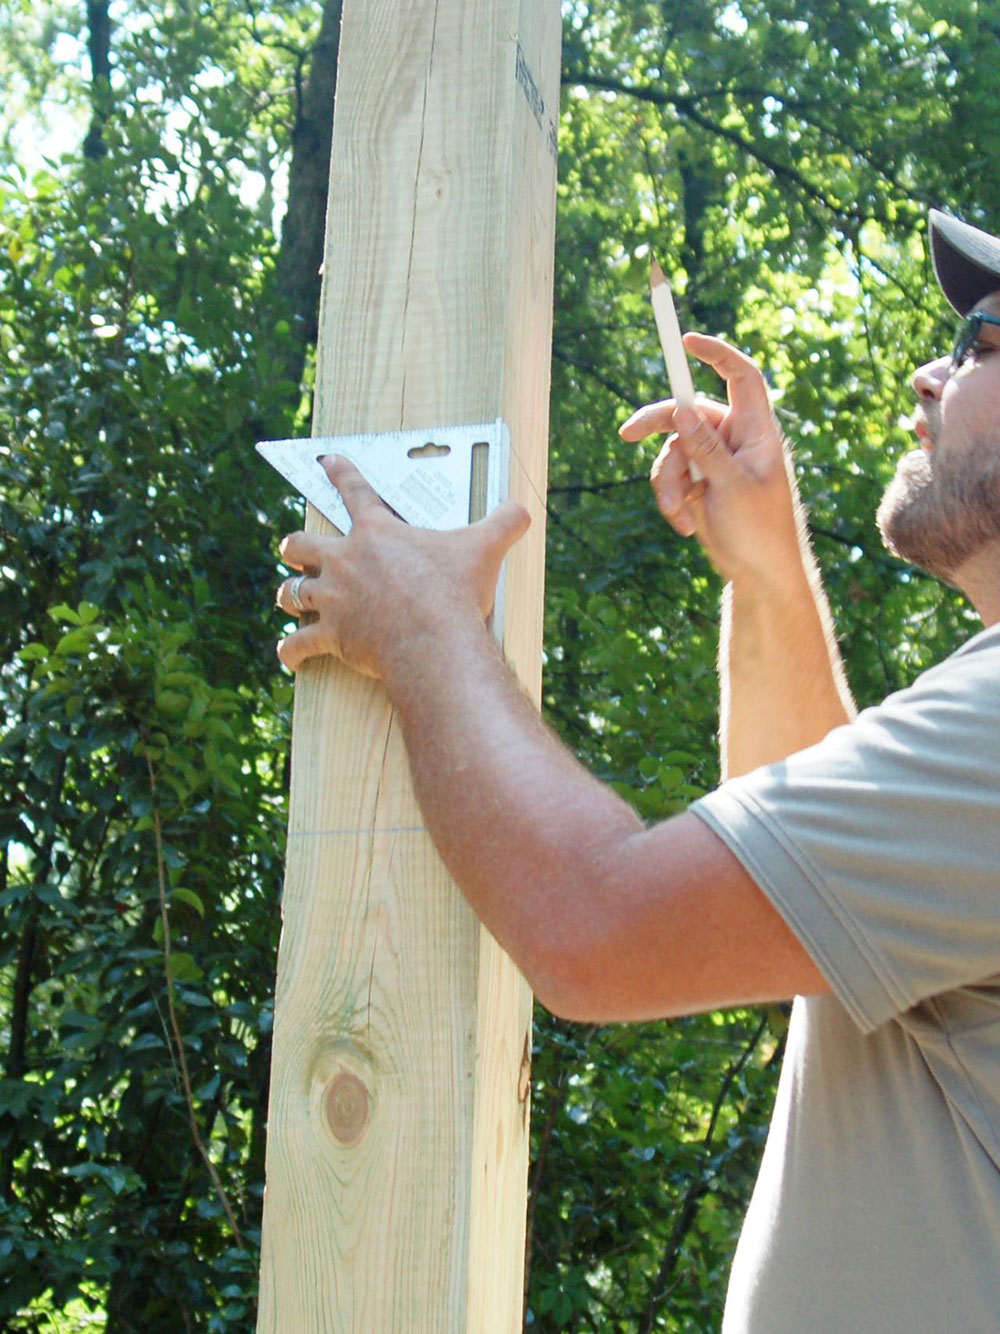 How-to-level-fence-posts-for-uniform-height How to level fence posts quickly and efficiently